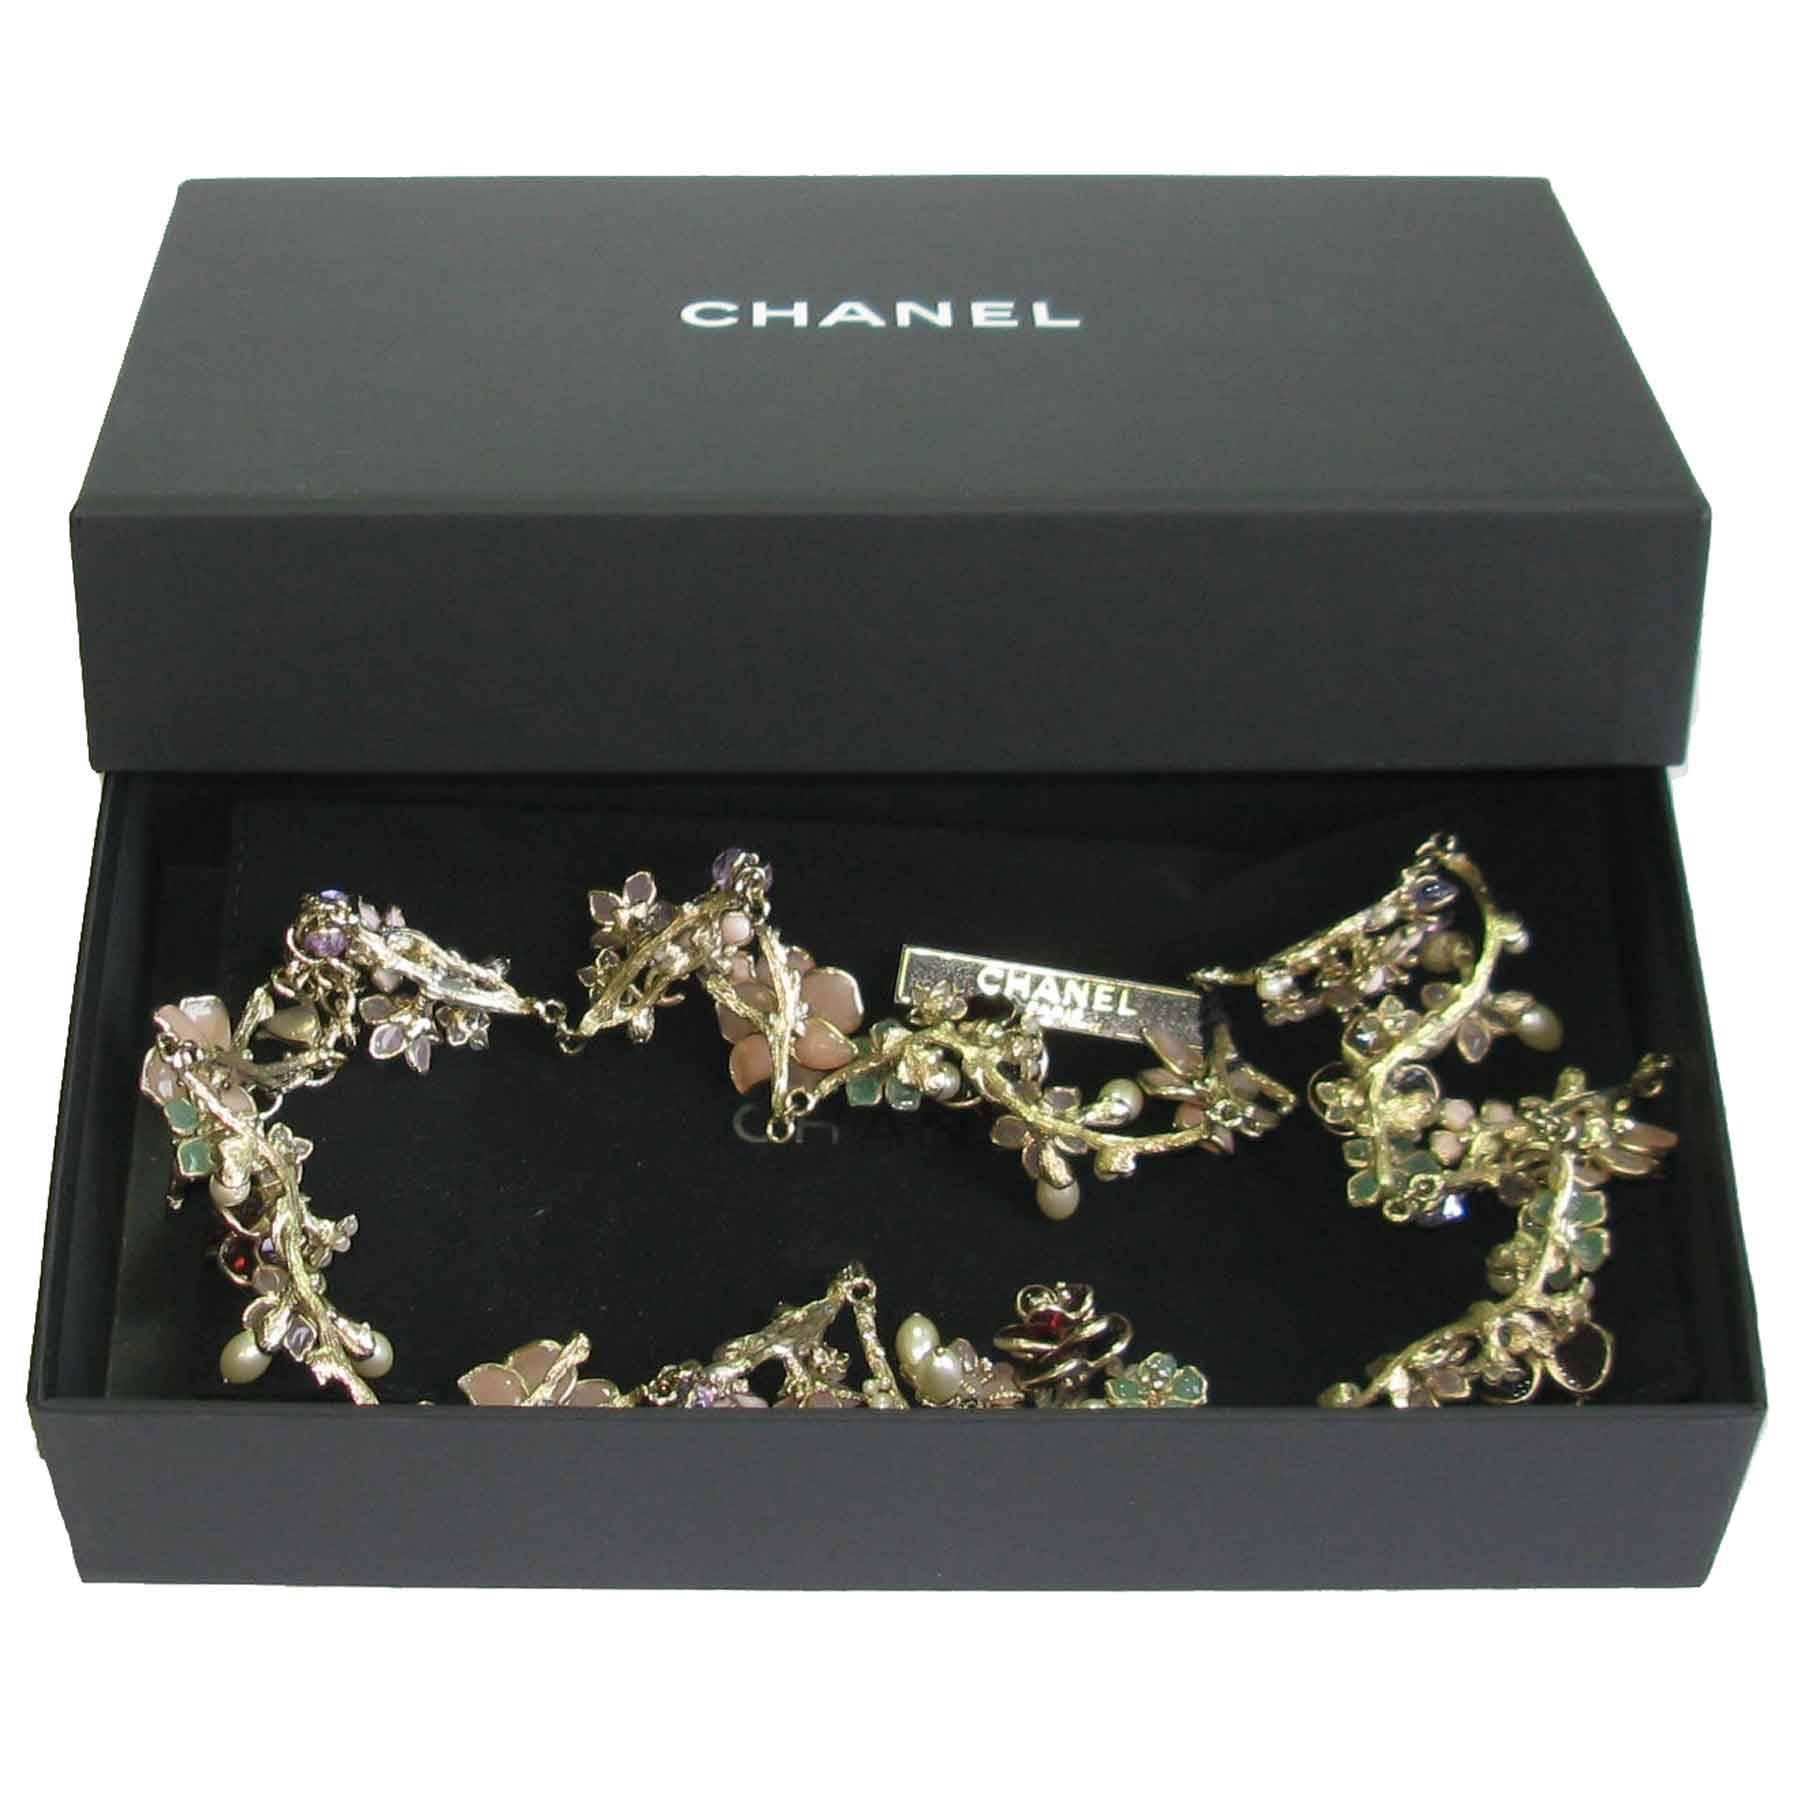 CHANEL Couture Belt in Gilded Metal and Flowers in Molten Glass 4